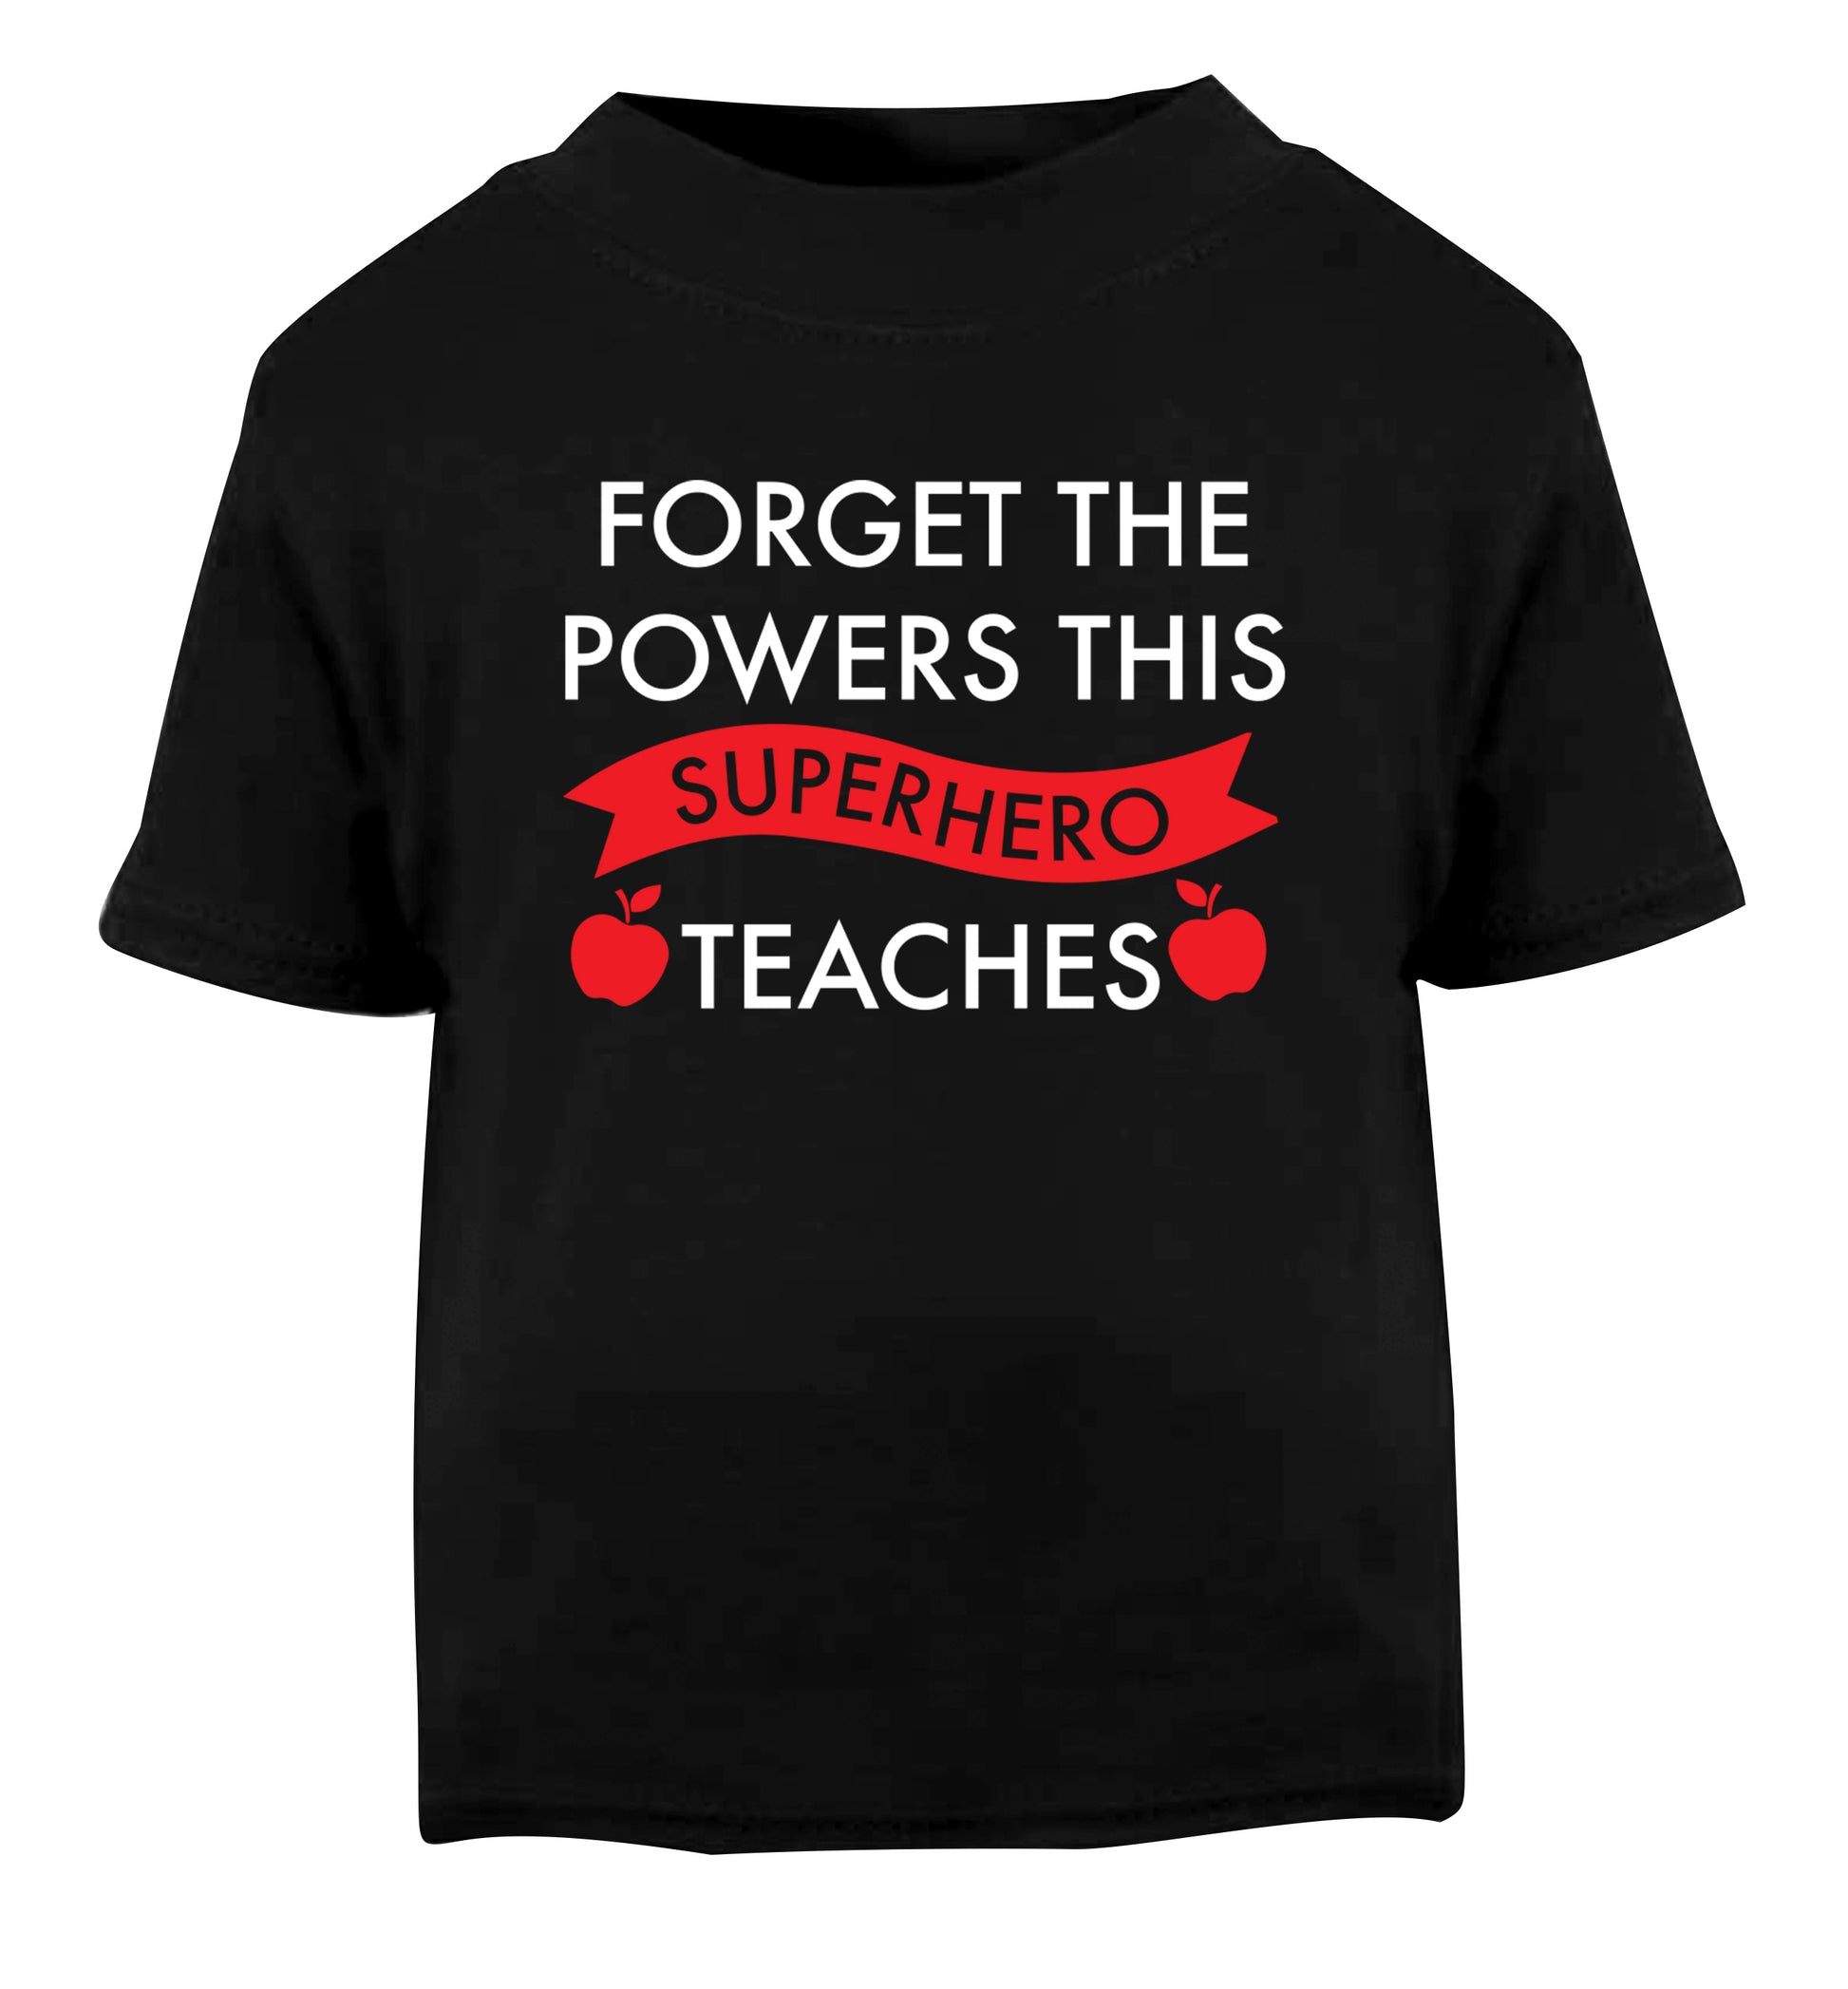 Forget the powers this superhero teaches Black Baby Toddler Tshirt 2 years